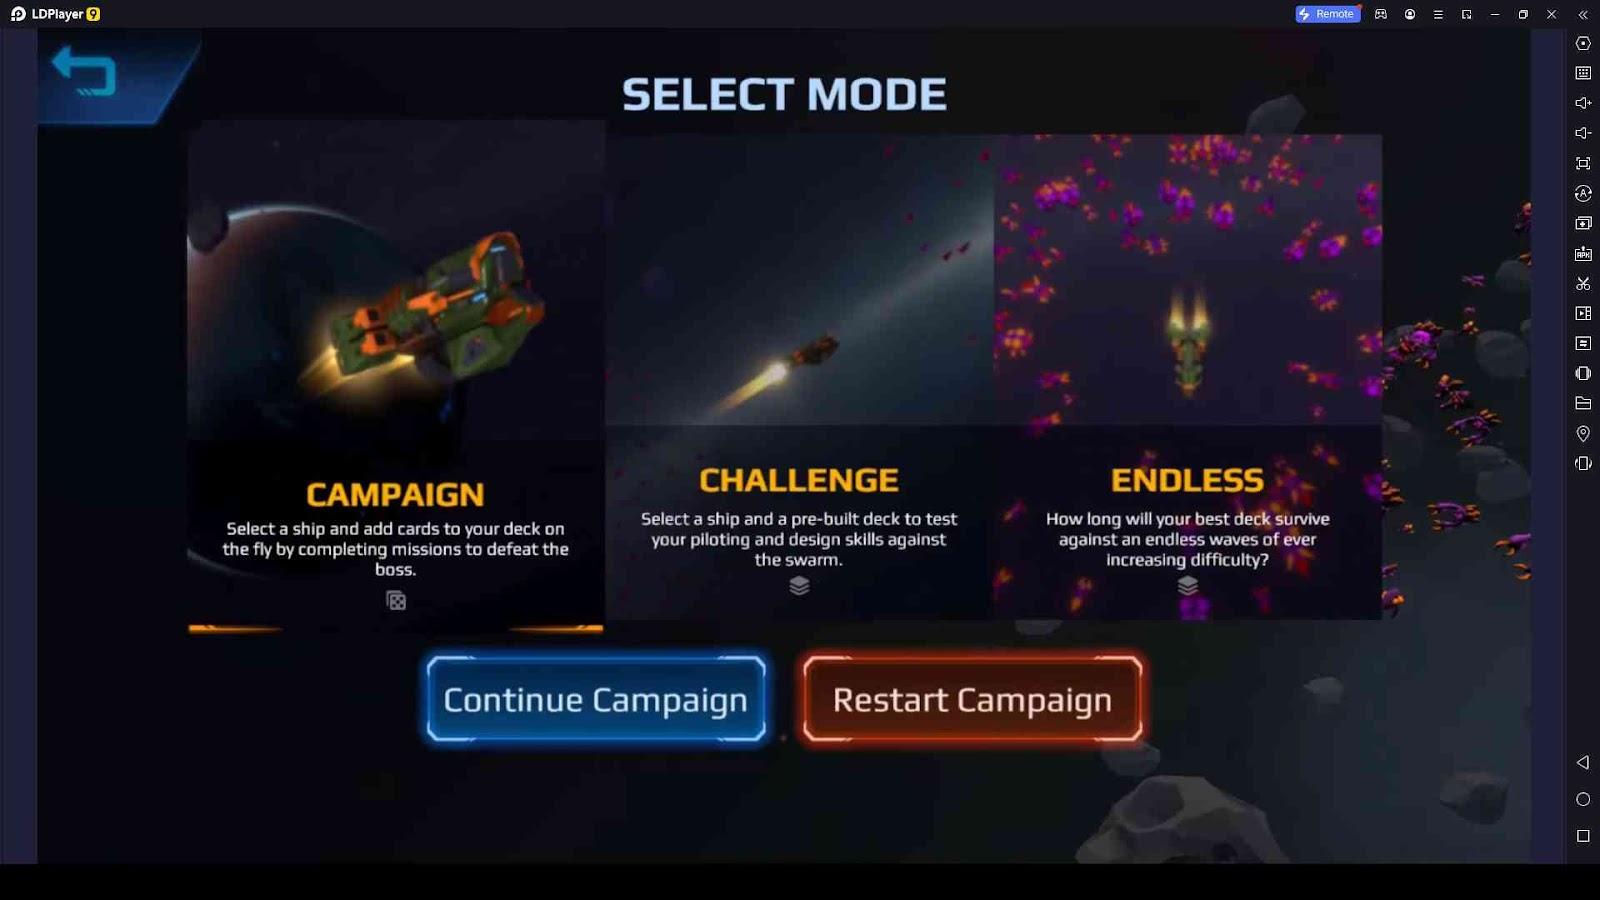 Select a Mode to Play